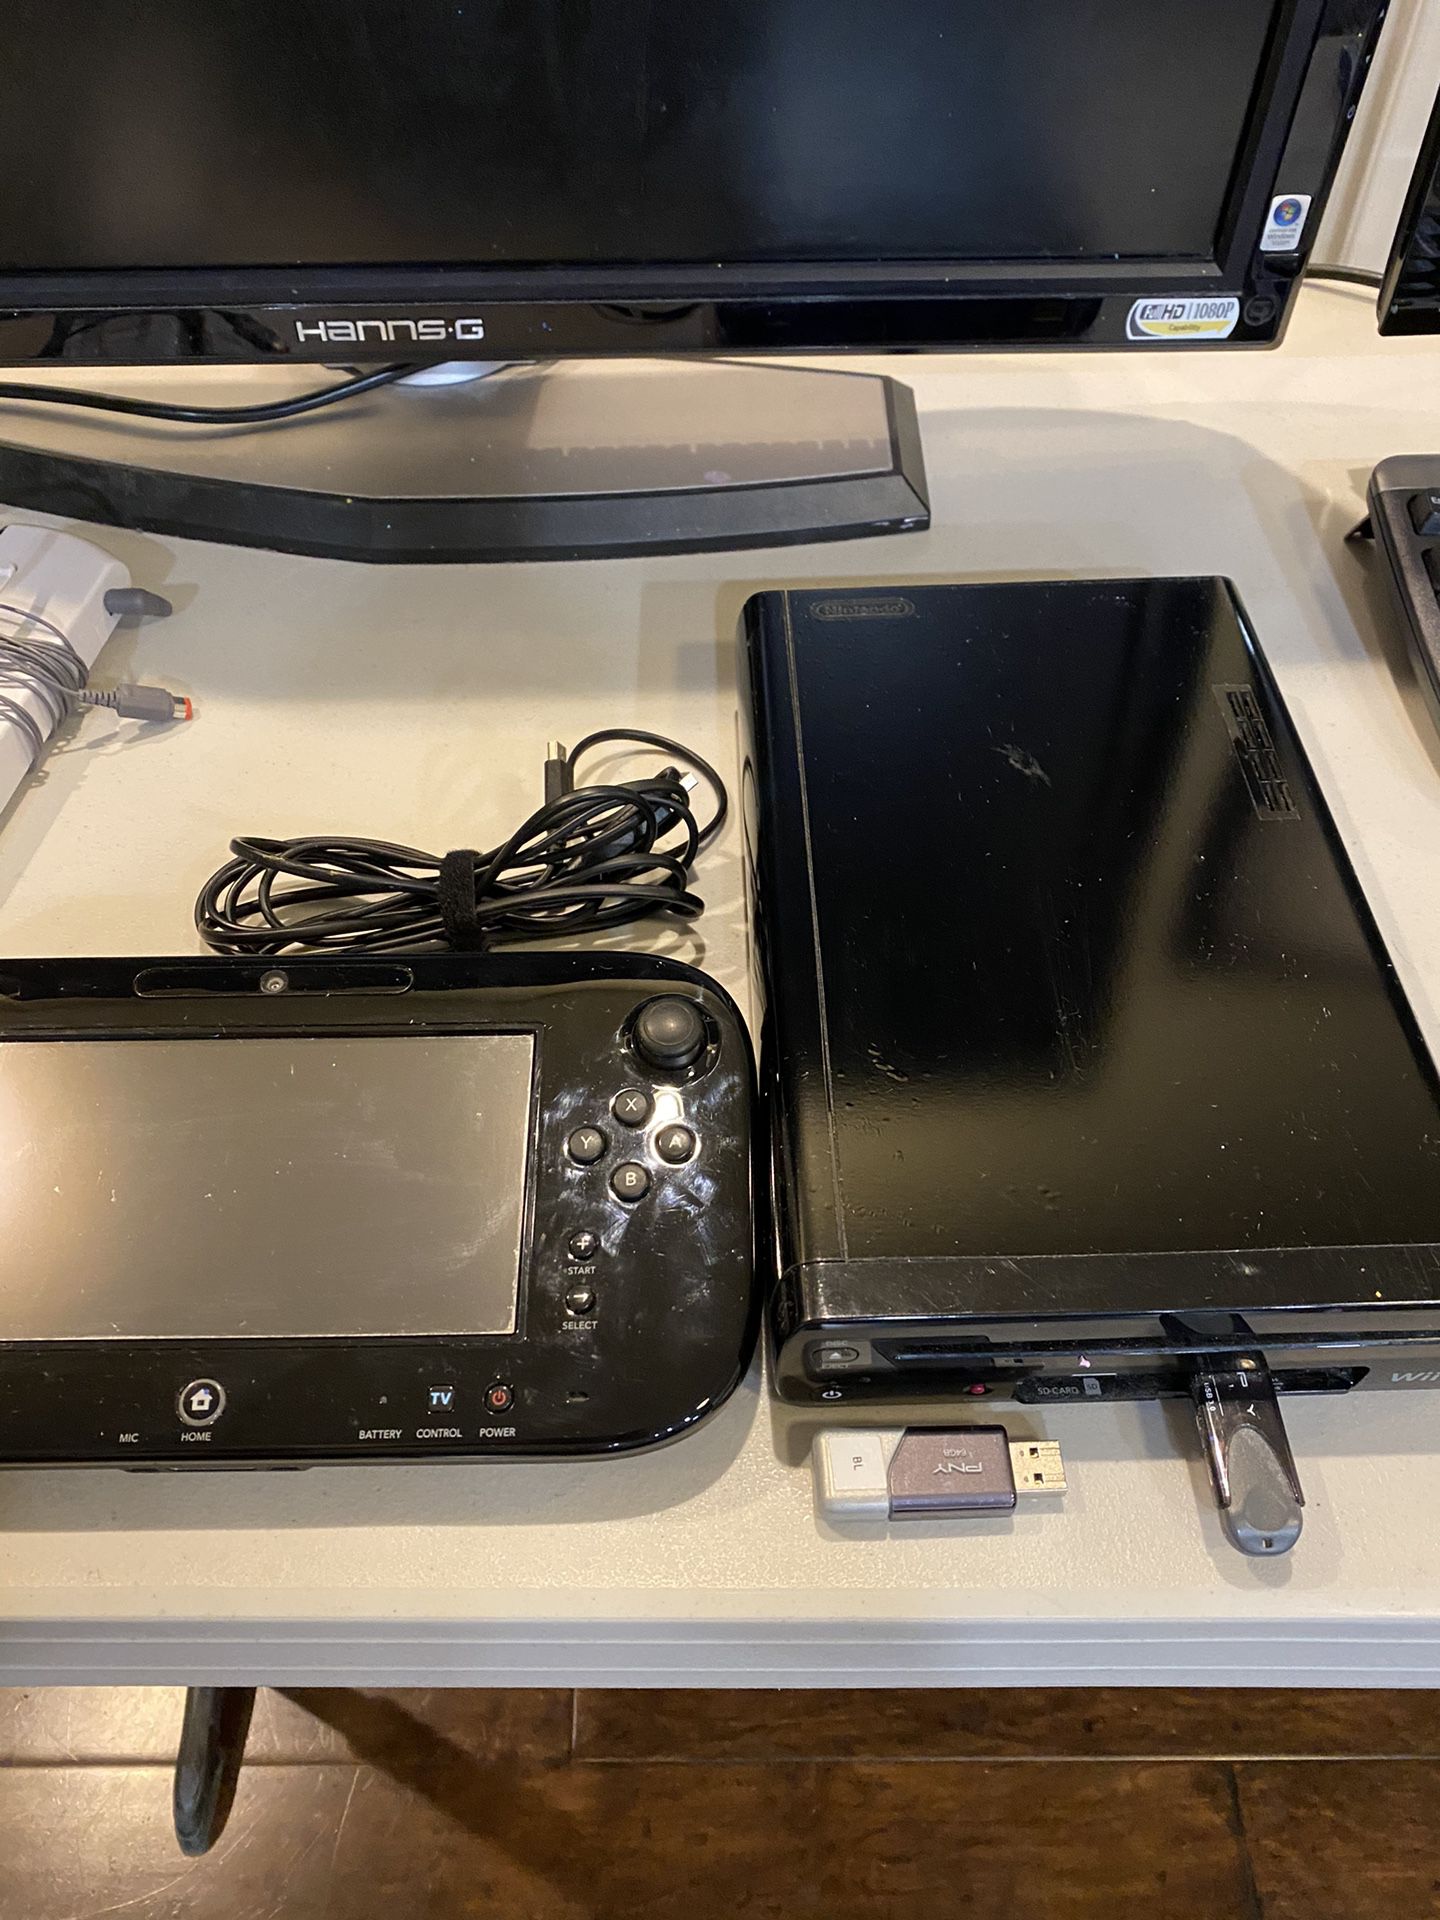 Nintendo Wii U modded game console with games